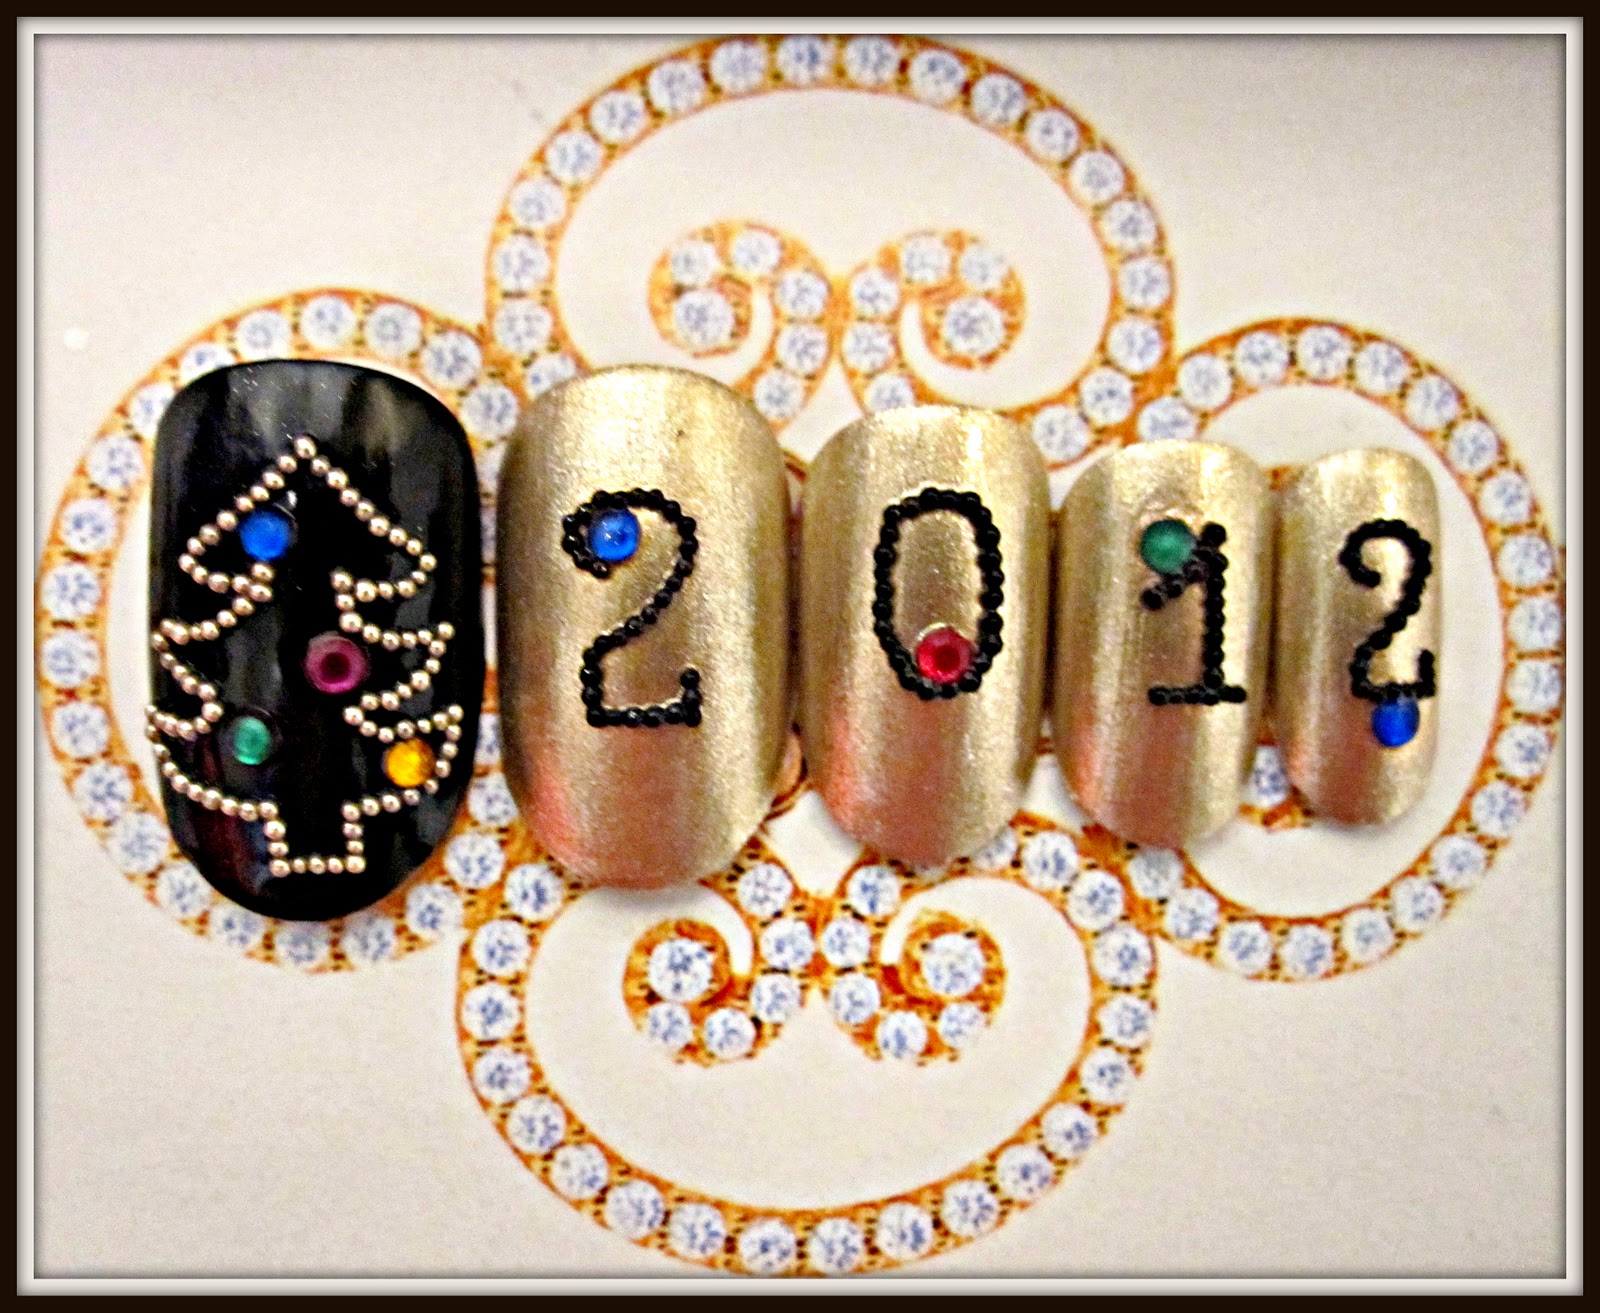 Less then month before New 2012 Year! this design is really easy to create